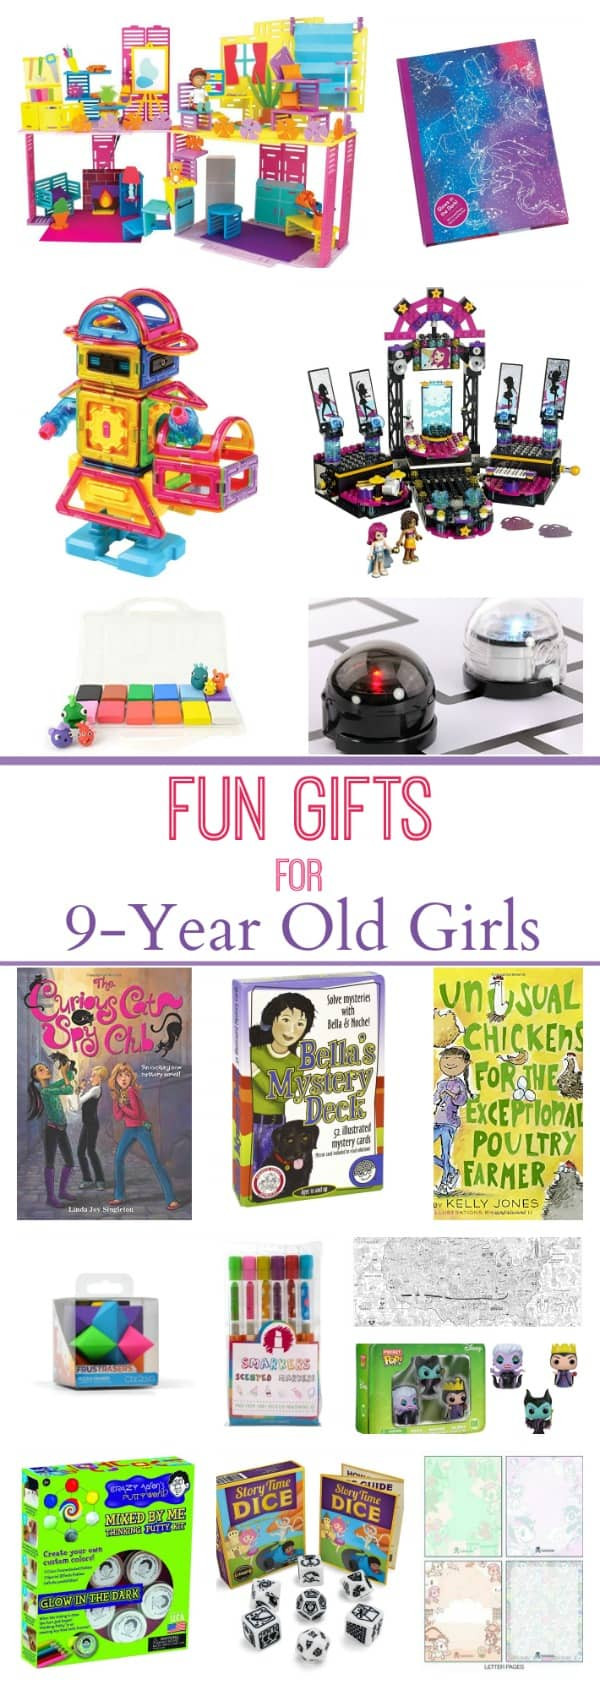 Gift Ideas For 9 Year Old Girls
 Gifts for 9 Year Old Girls